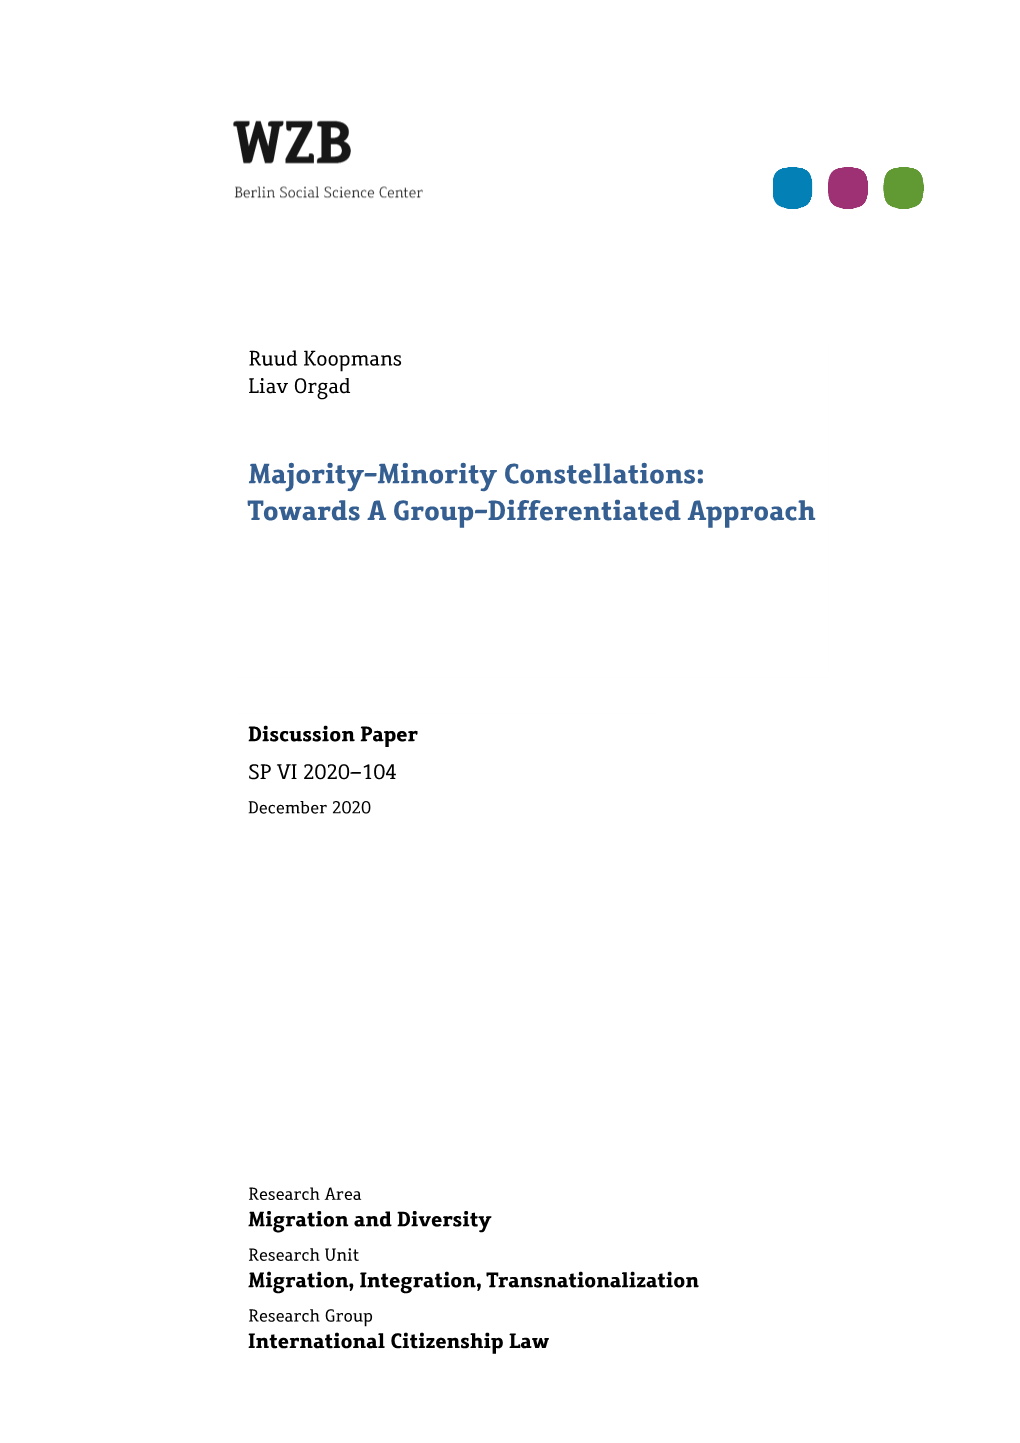 Majority-Minority Constellations: Towards a Group-Differentiated Approach